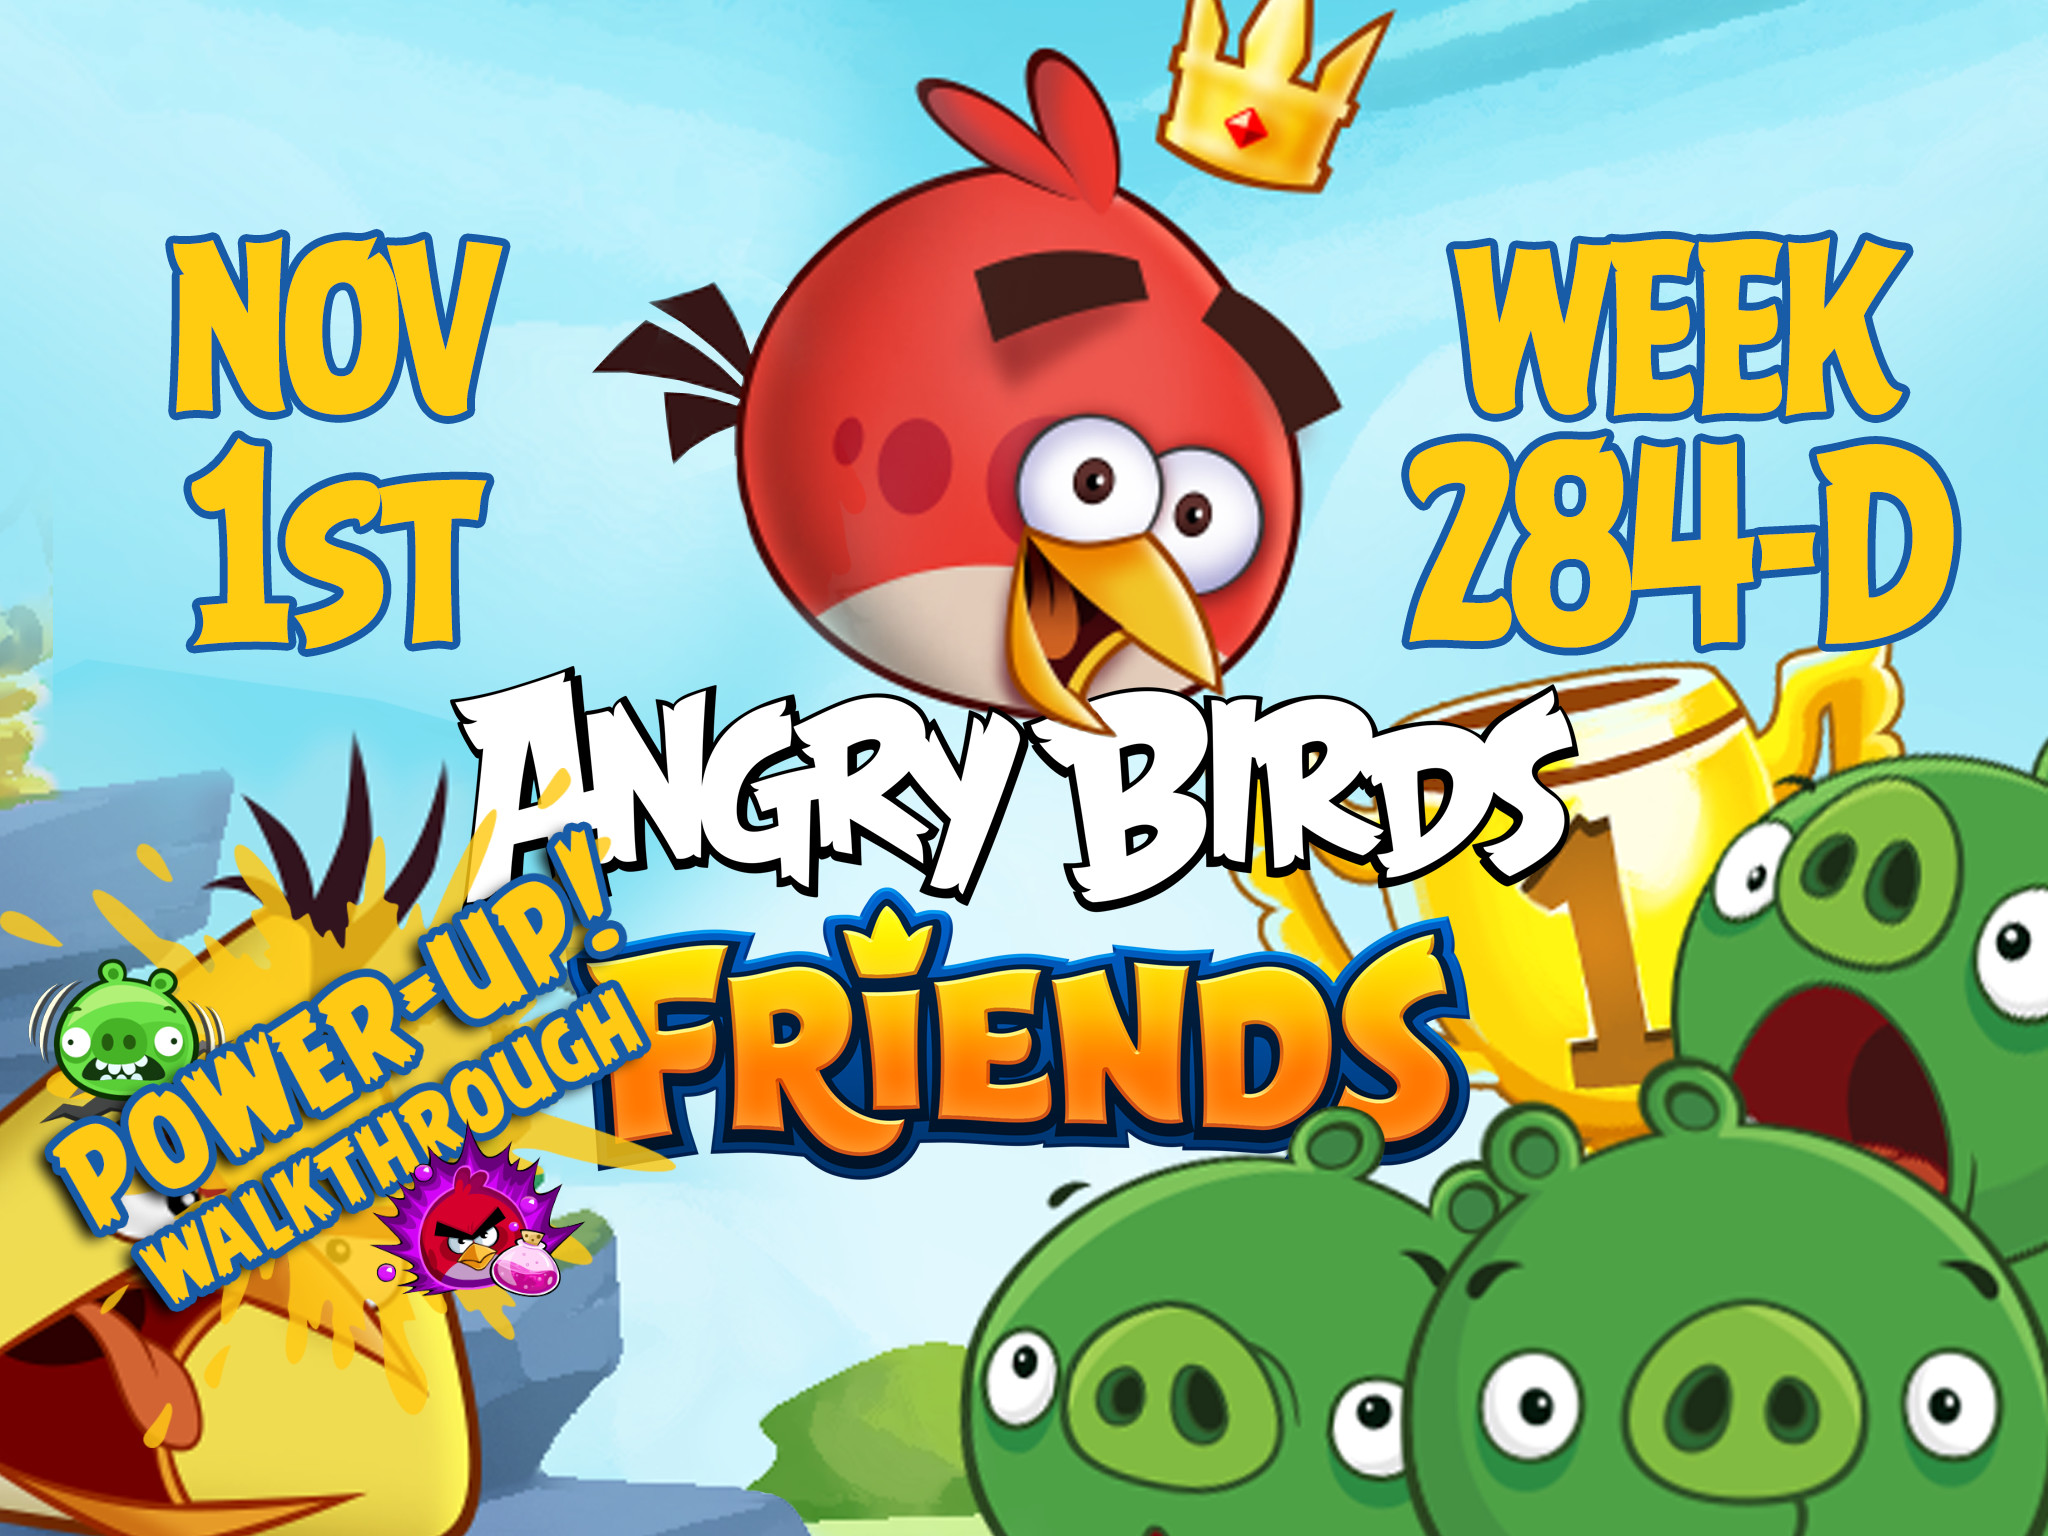 Angry Birds Friends Tournament Week 284-D Feature Image PU